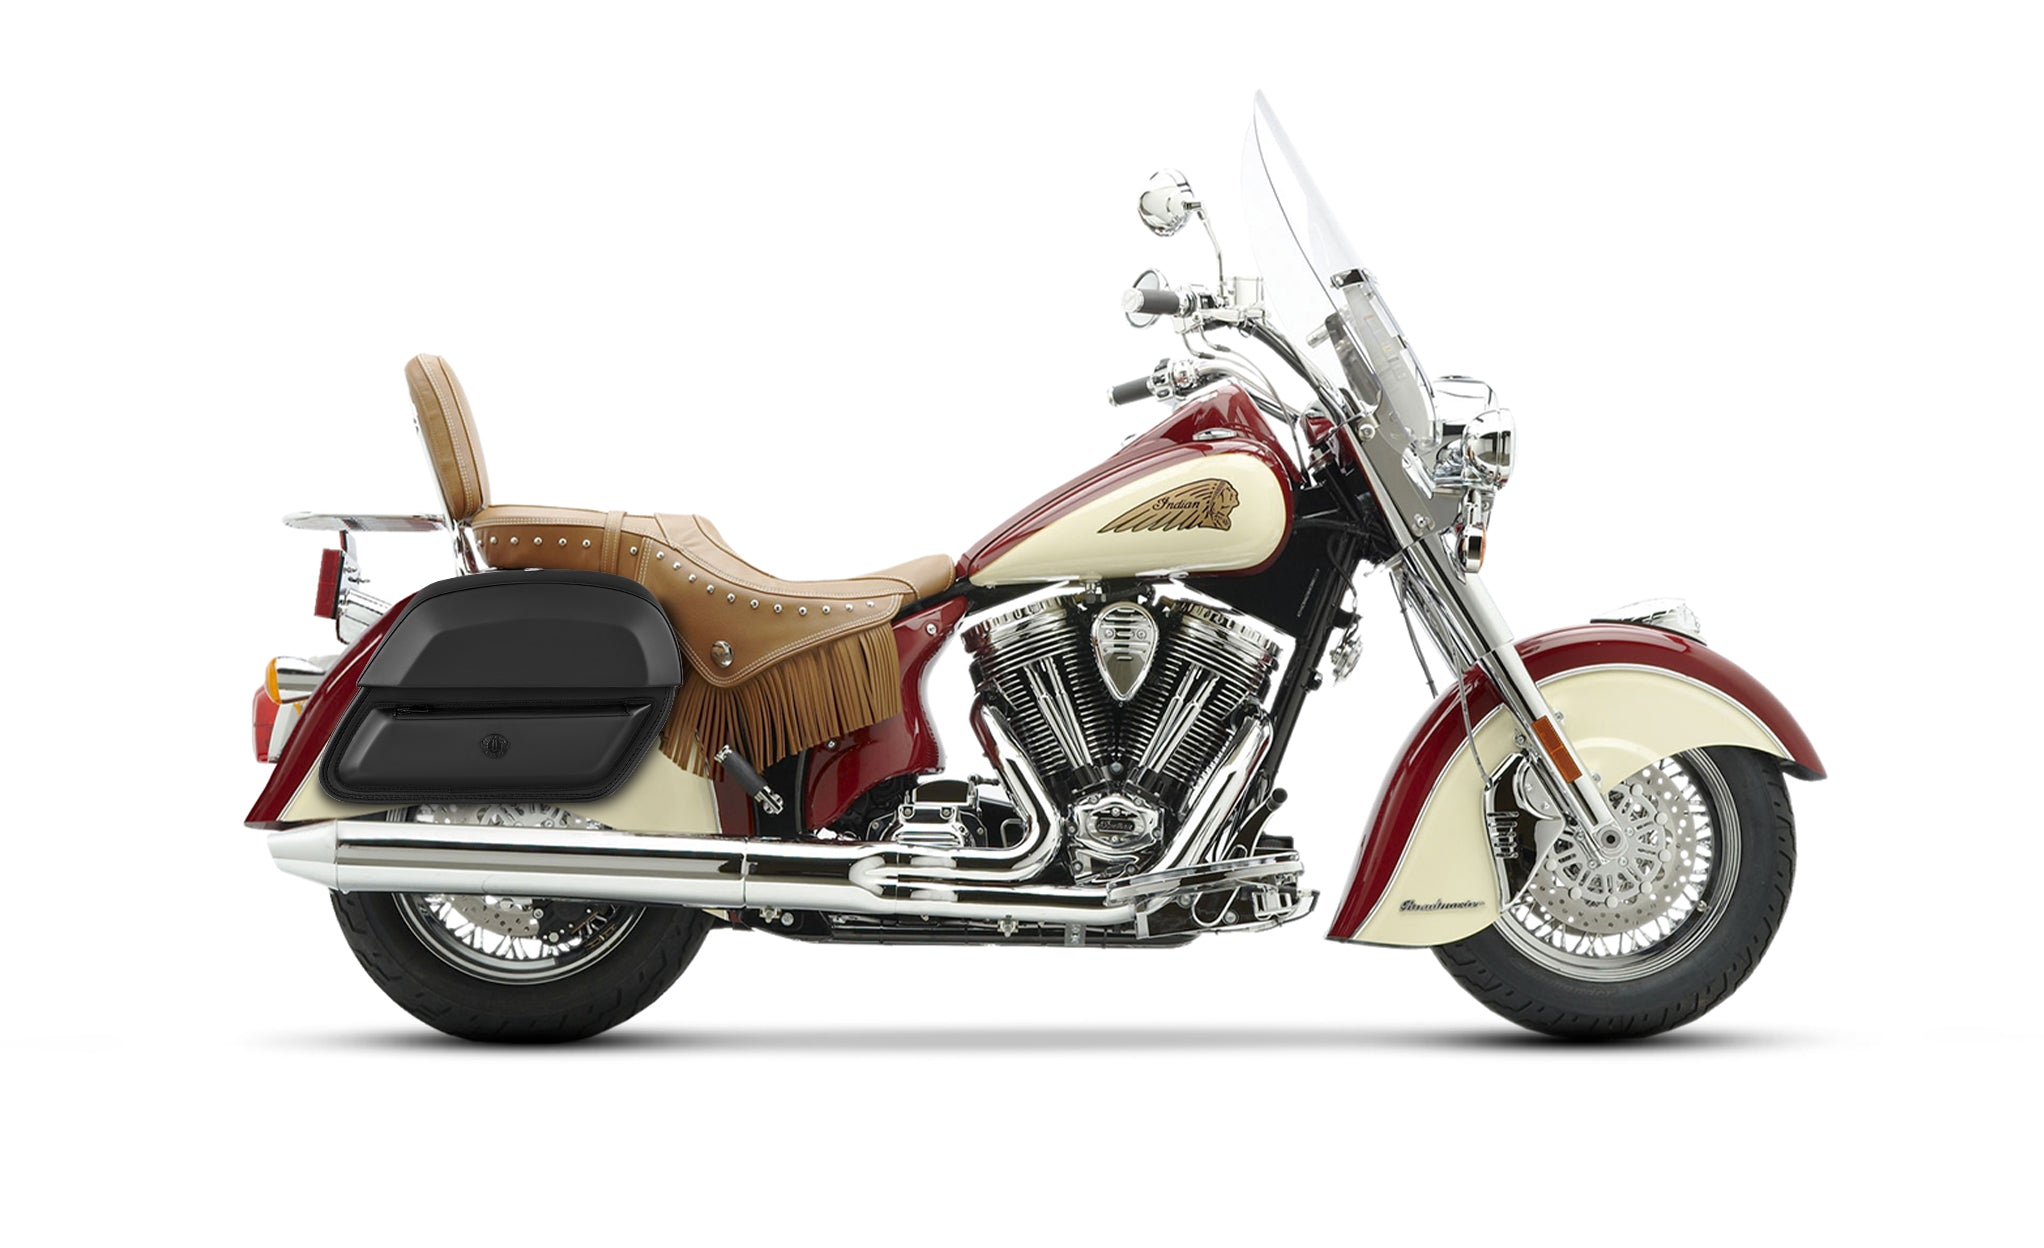 28L - Wraith Medium Indian Chief Roadmaster Leather Motorcycle Saddlebags BAG on Bike View @expand